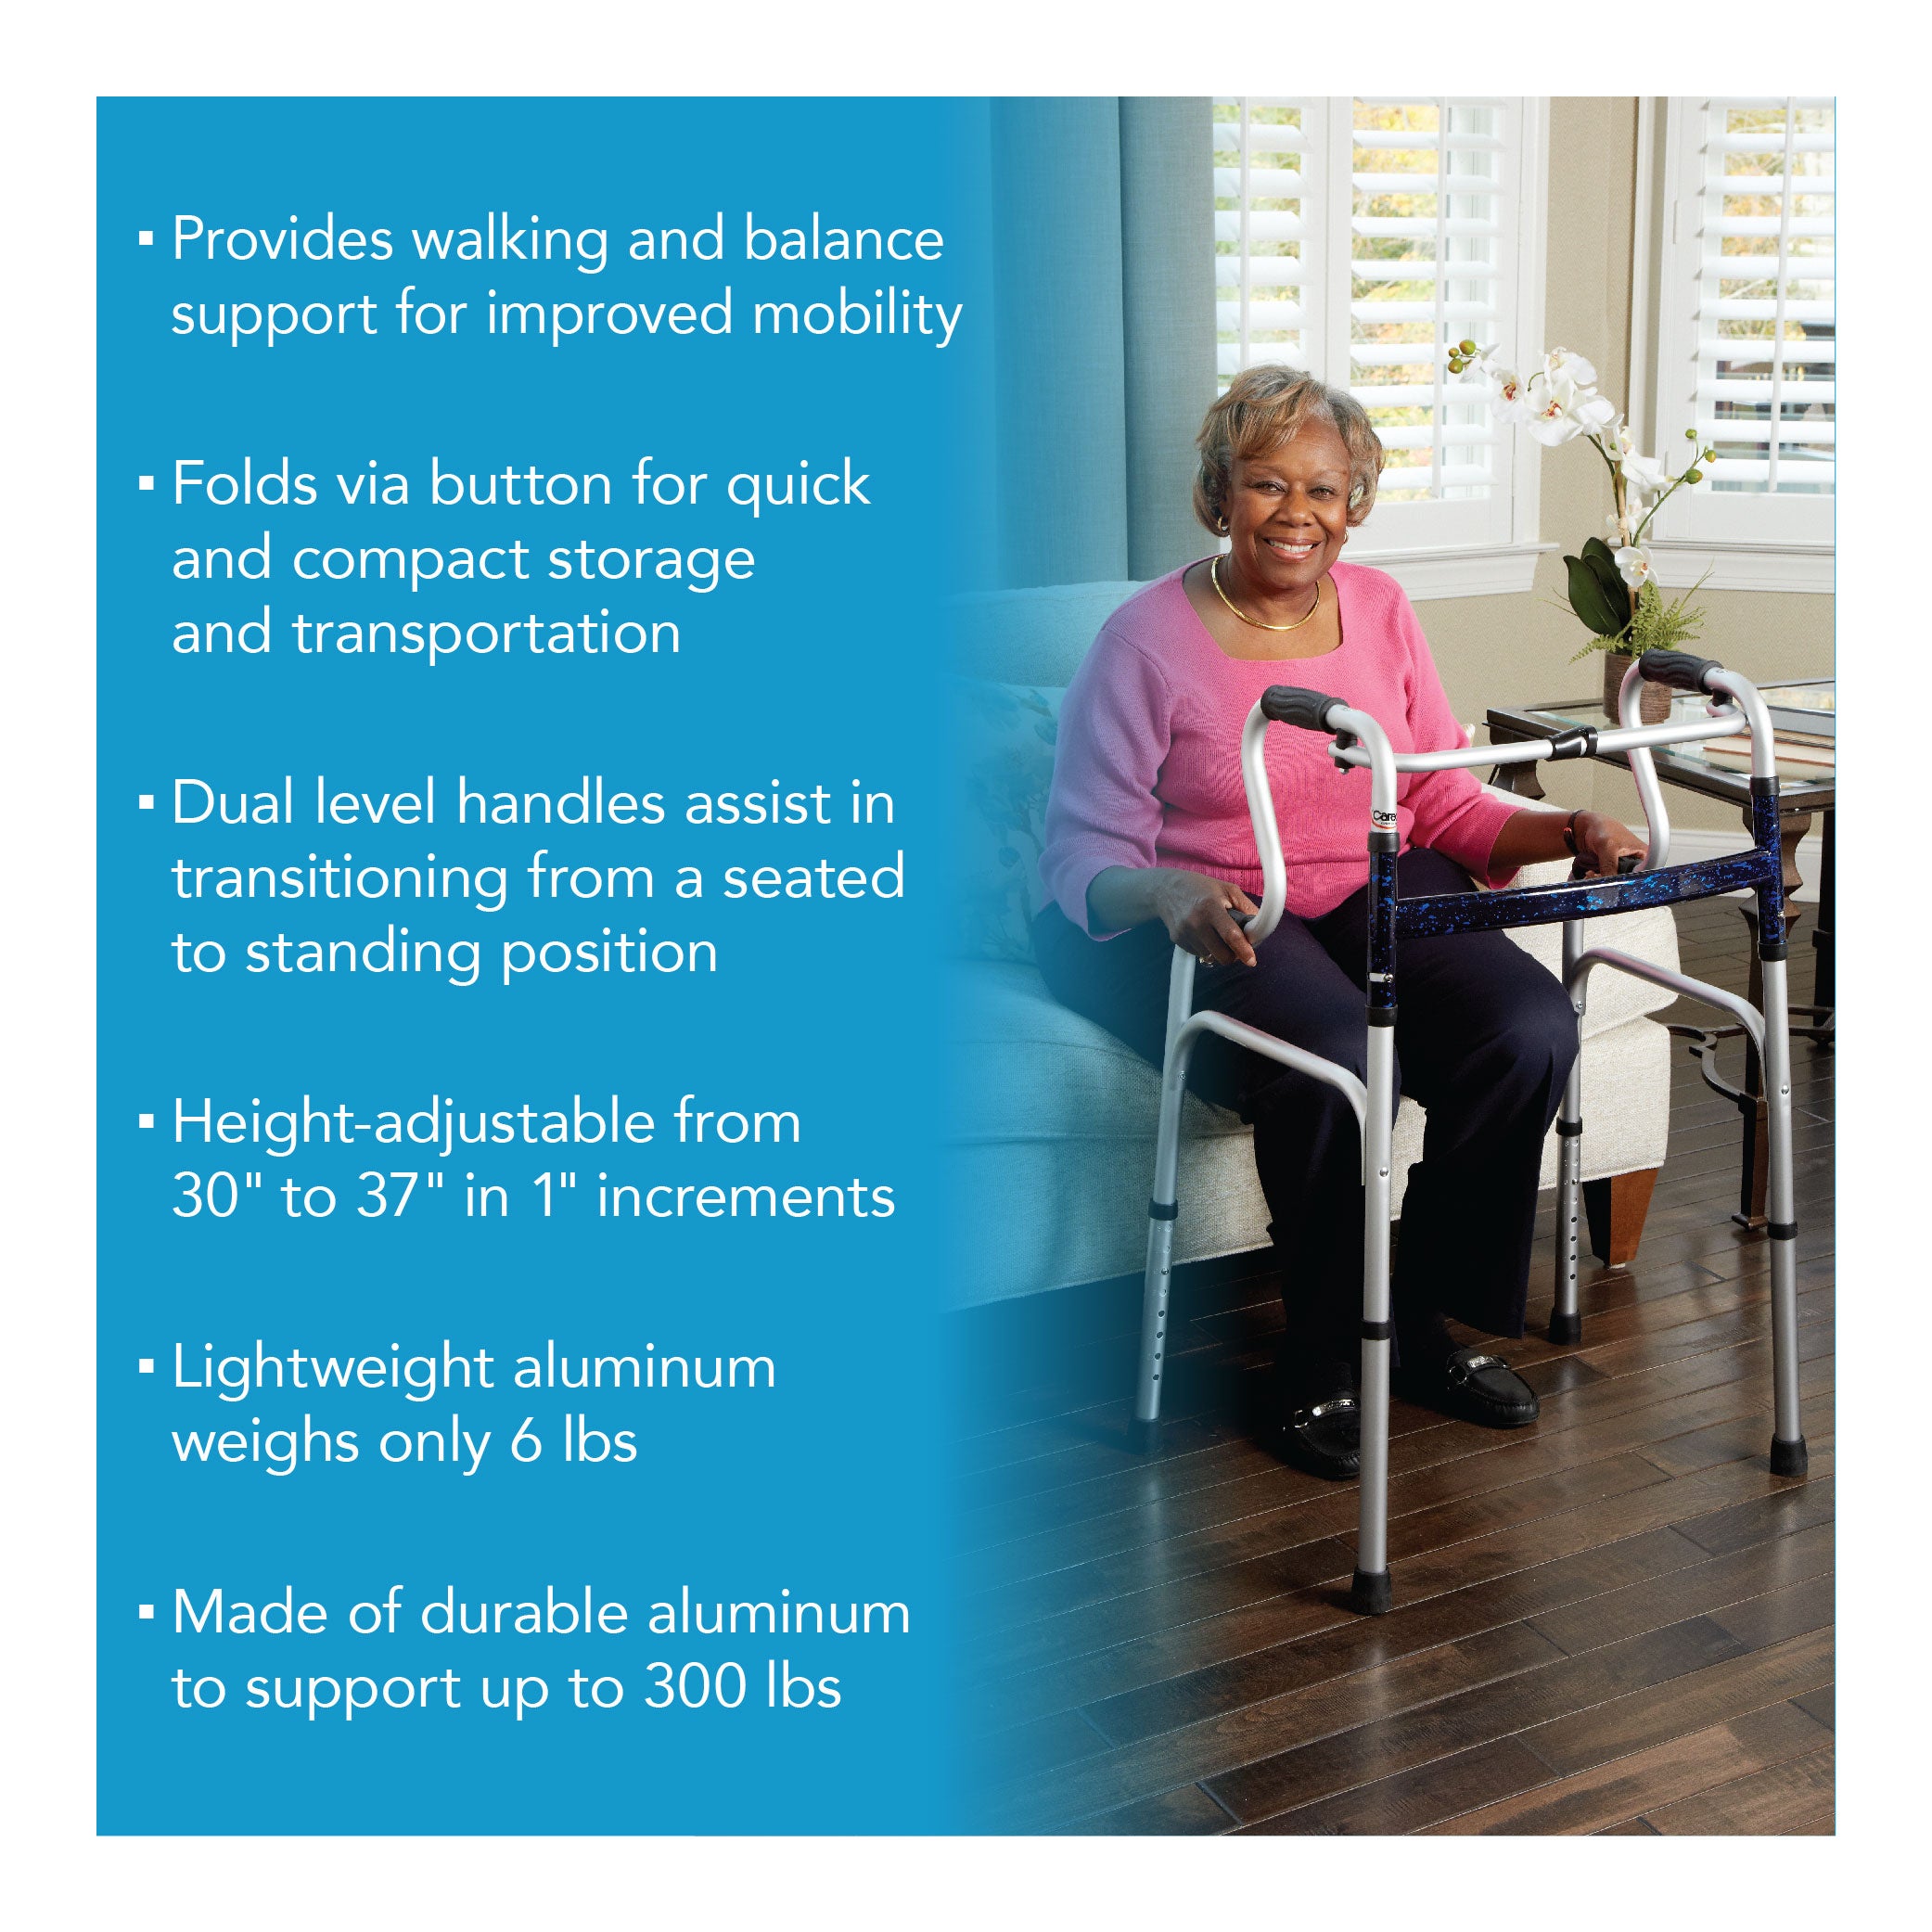 A woman sitting in front of an uplift walker. Text showing its features and benefits as mentioned in the product description.